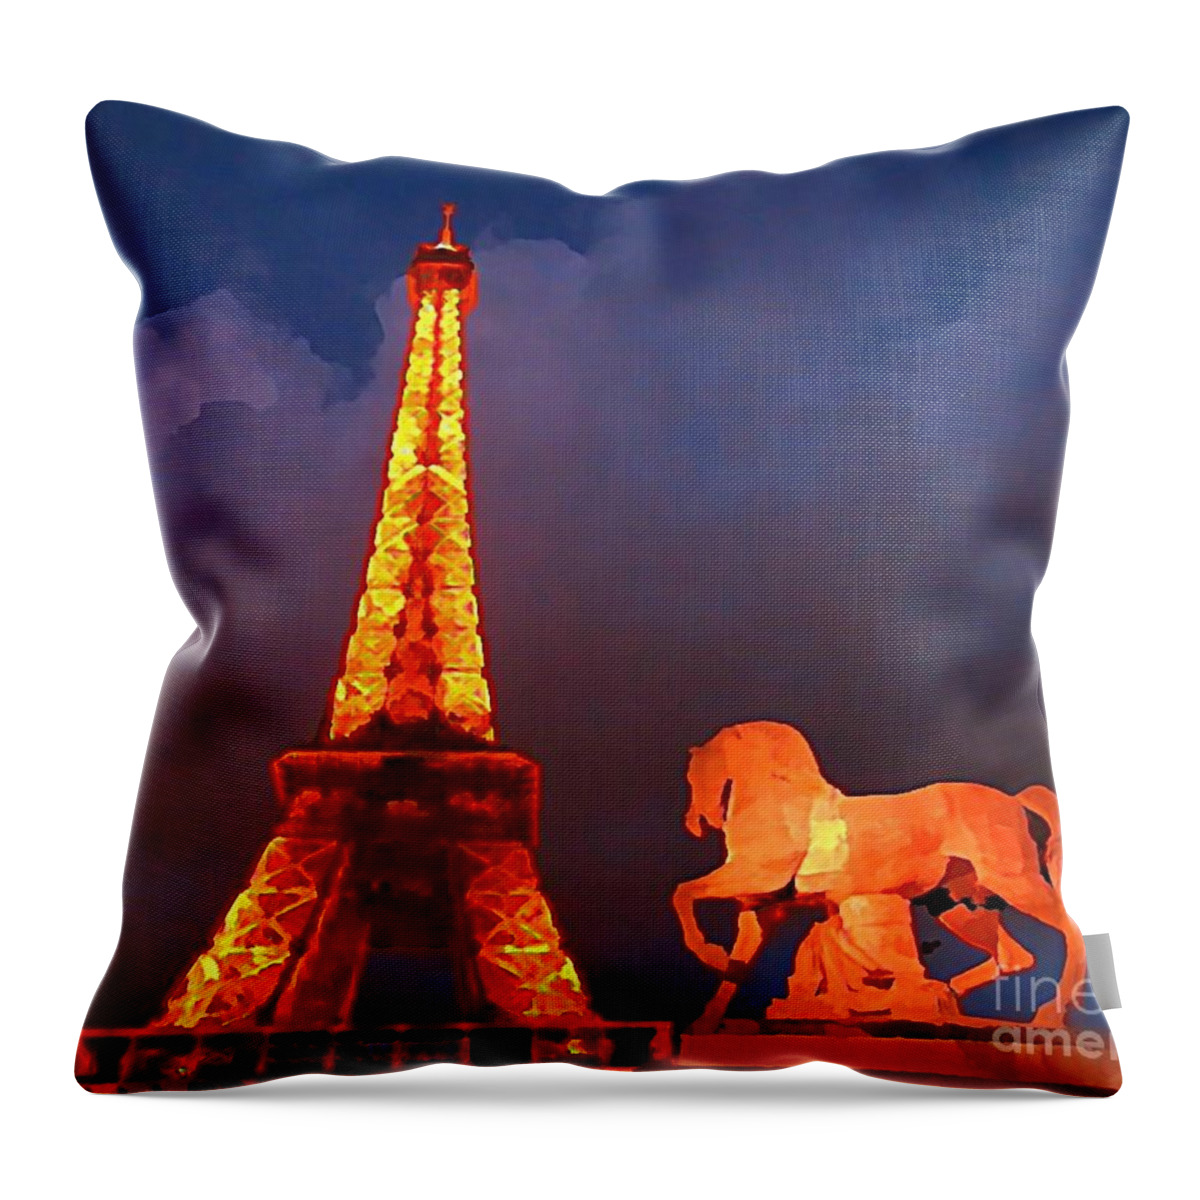 Statues Throw Pillow featuring the painting Eiffel Tower and Horse by John Malone